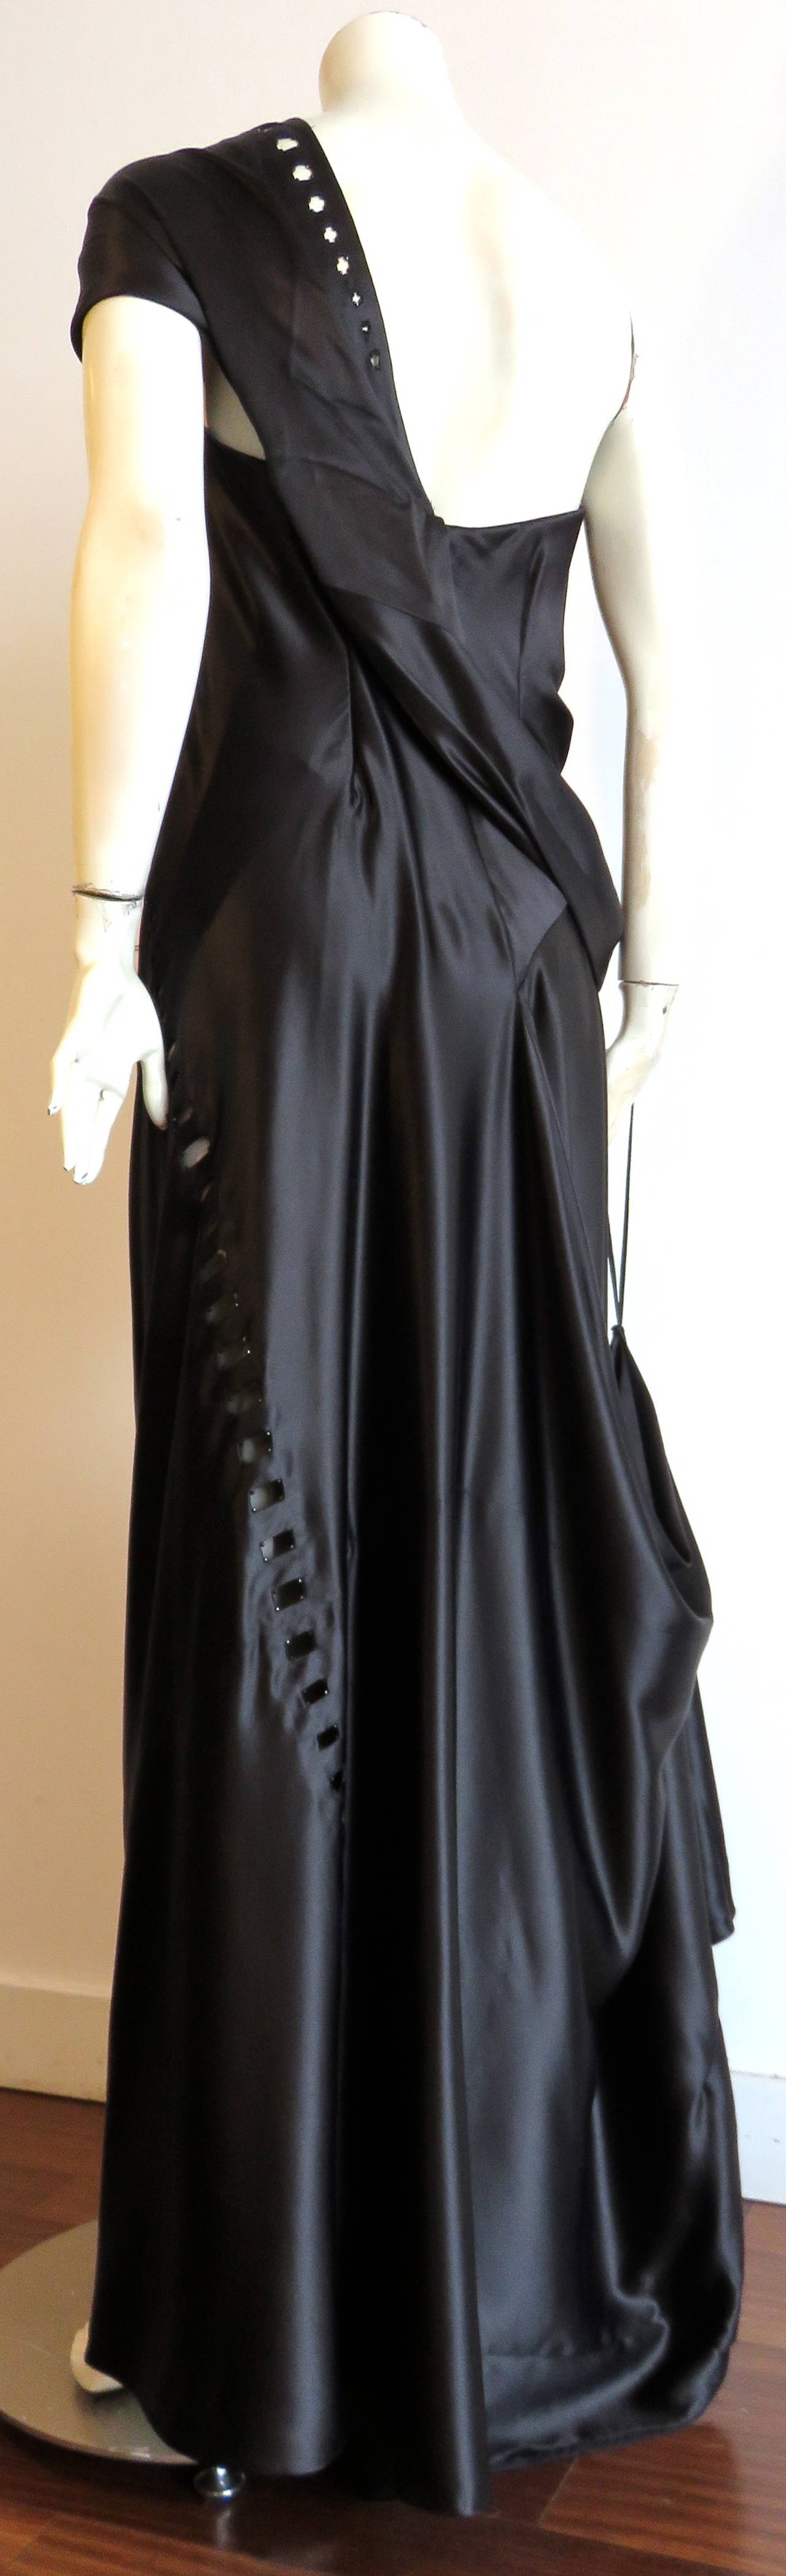 MARC JACOBS Silk charmeuse evening gown dress In Excellent Condition For Sale In Newport Beach, CA